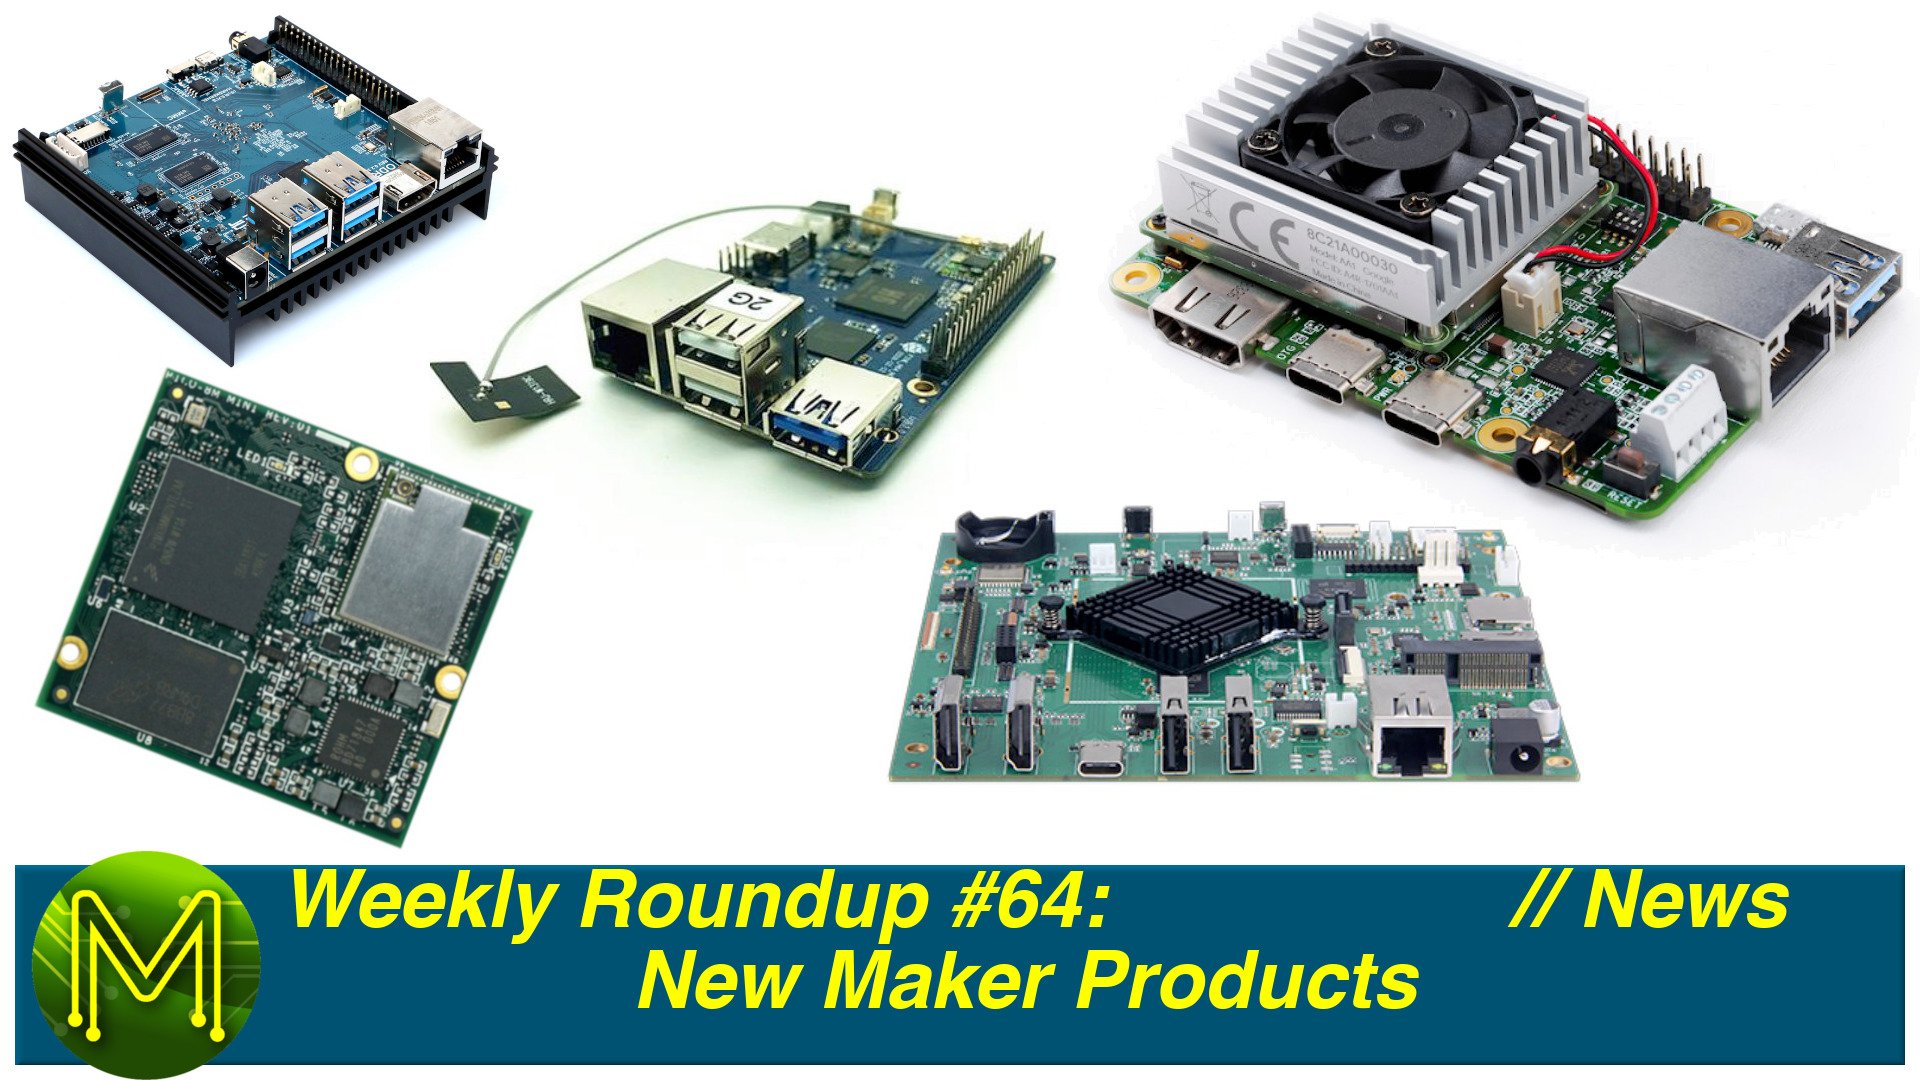 Weekly Roundup #64 - New Maker Products